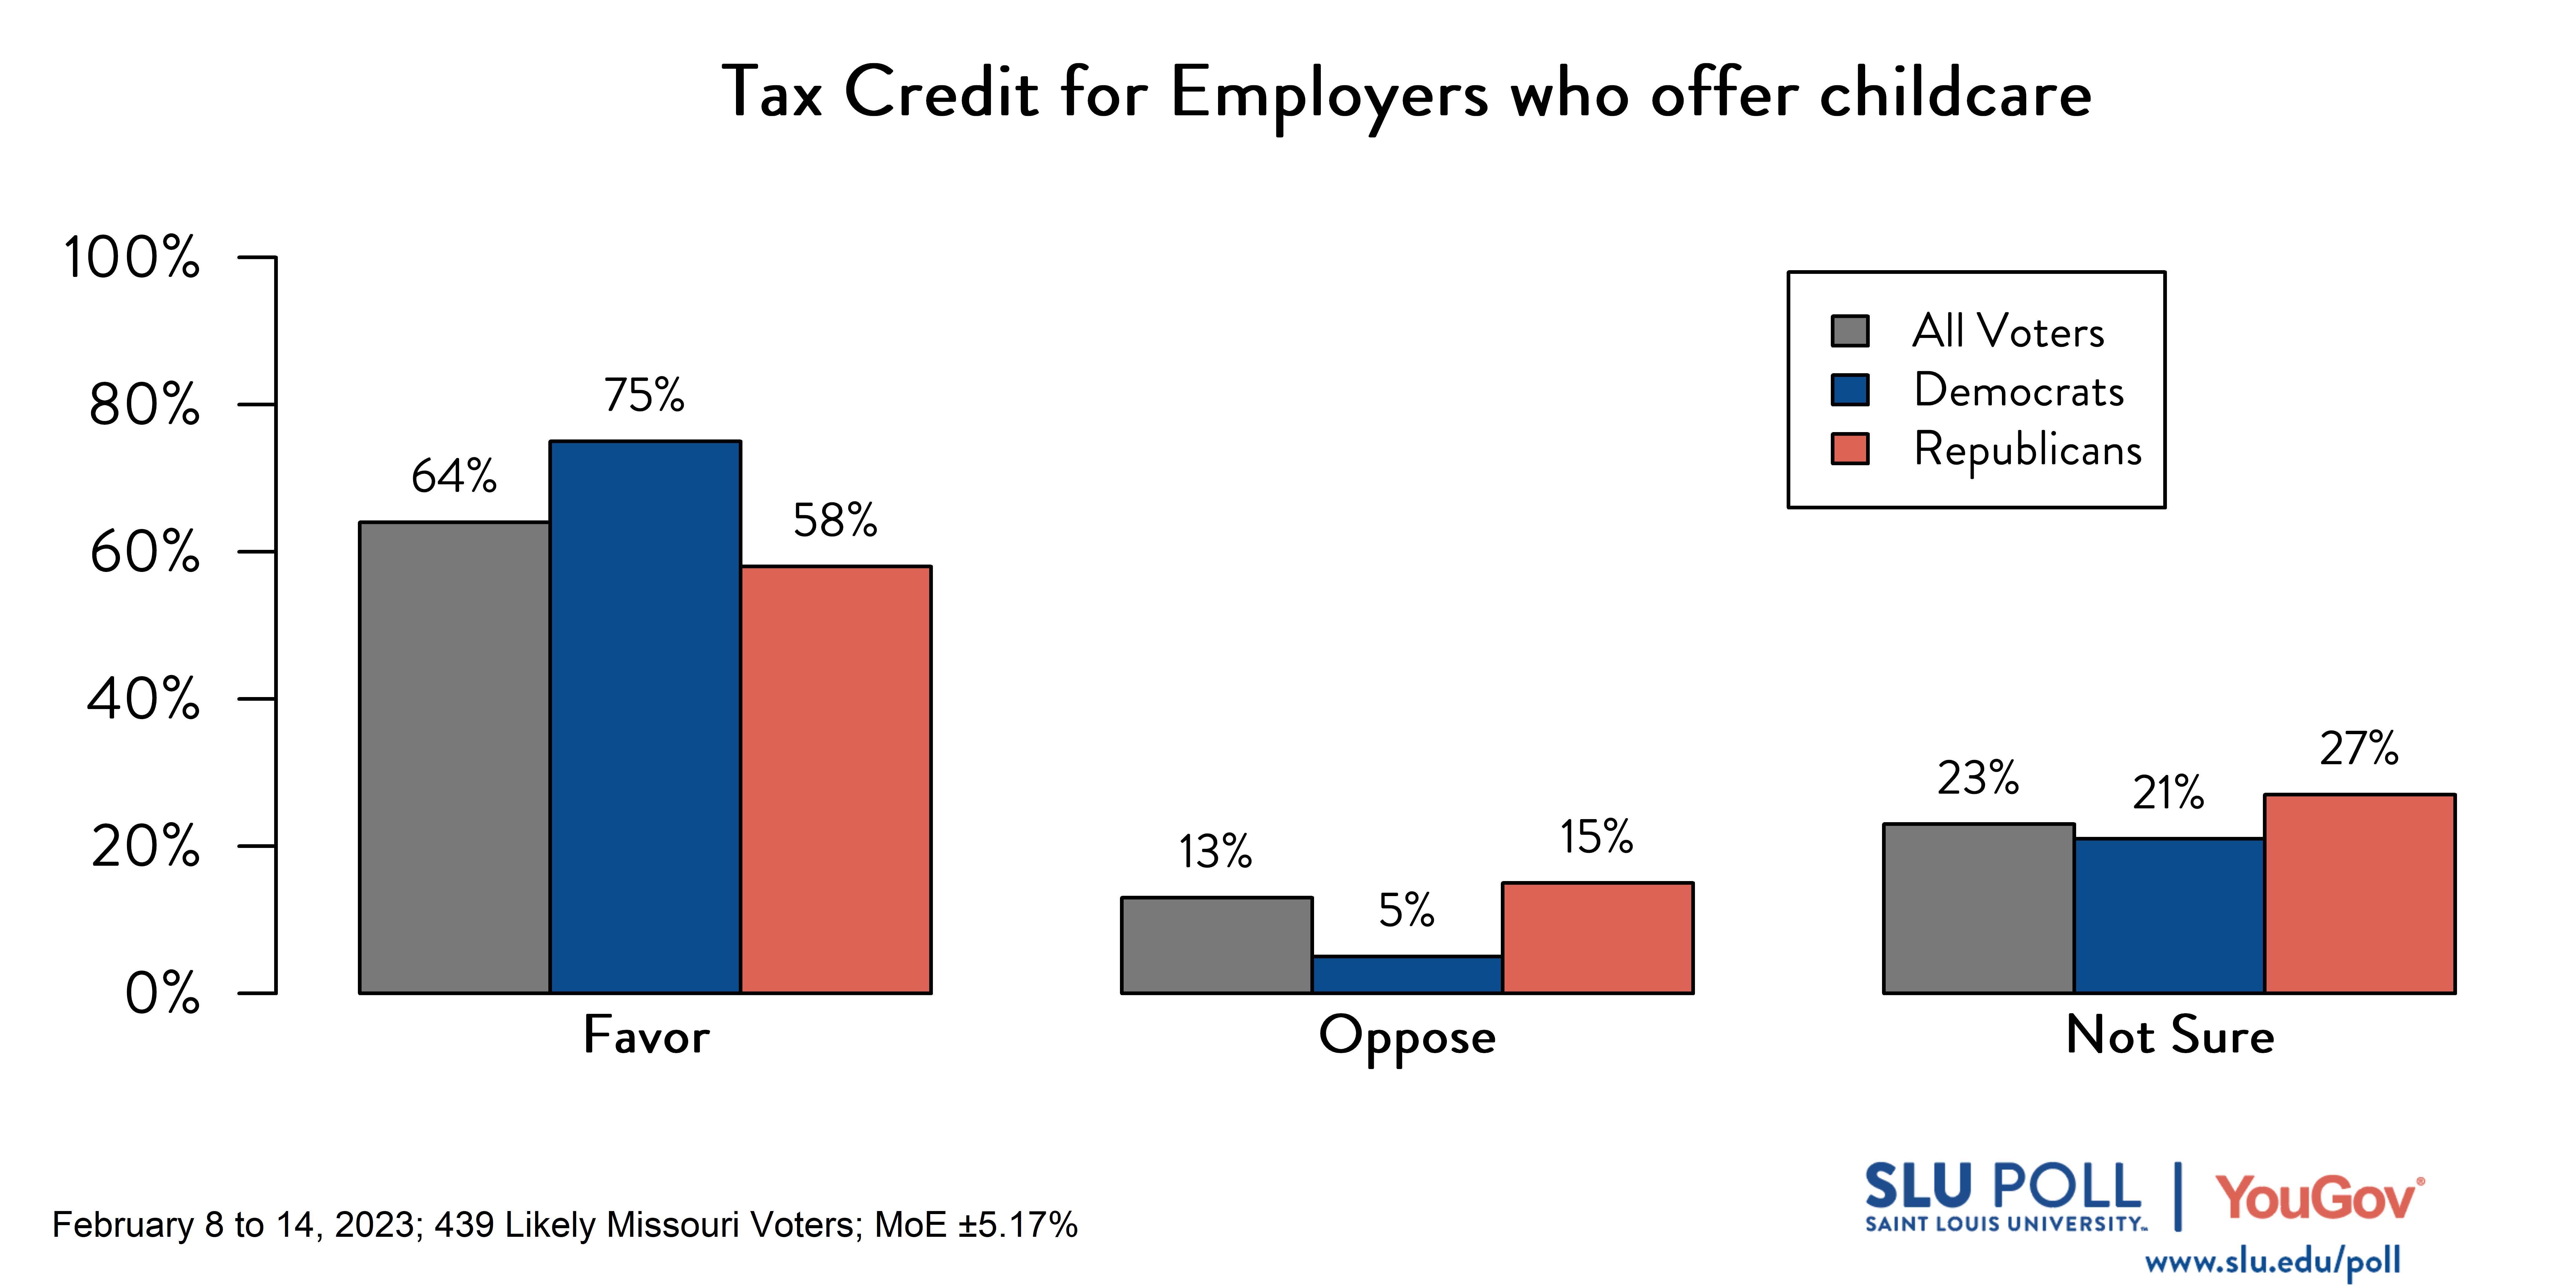 Likely voters' responses to 'Do you favor or oppose the following policies: Employers who provide childcare assistance should receive a state tax credit for 30 percent of expenses paid to a childcare facility?': 64% Favor, 13% Oppose, and 23% Not sure. Democratic voters' responses: ' 75% Favor, 5% Oppose, and 21% Not sure. Republican voters' responses: 58% Favor, 15% Oppose, and 27% Not sure.